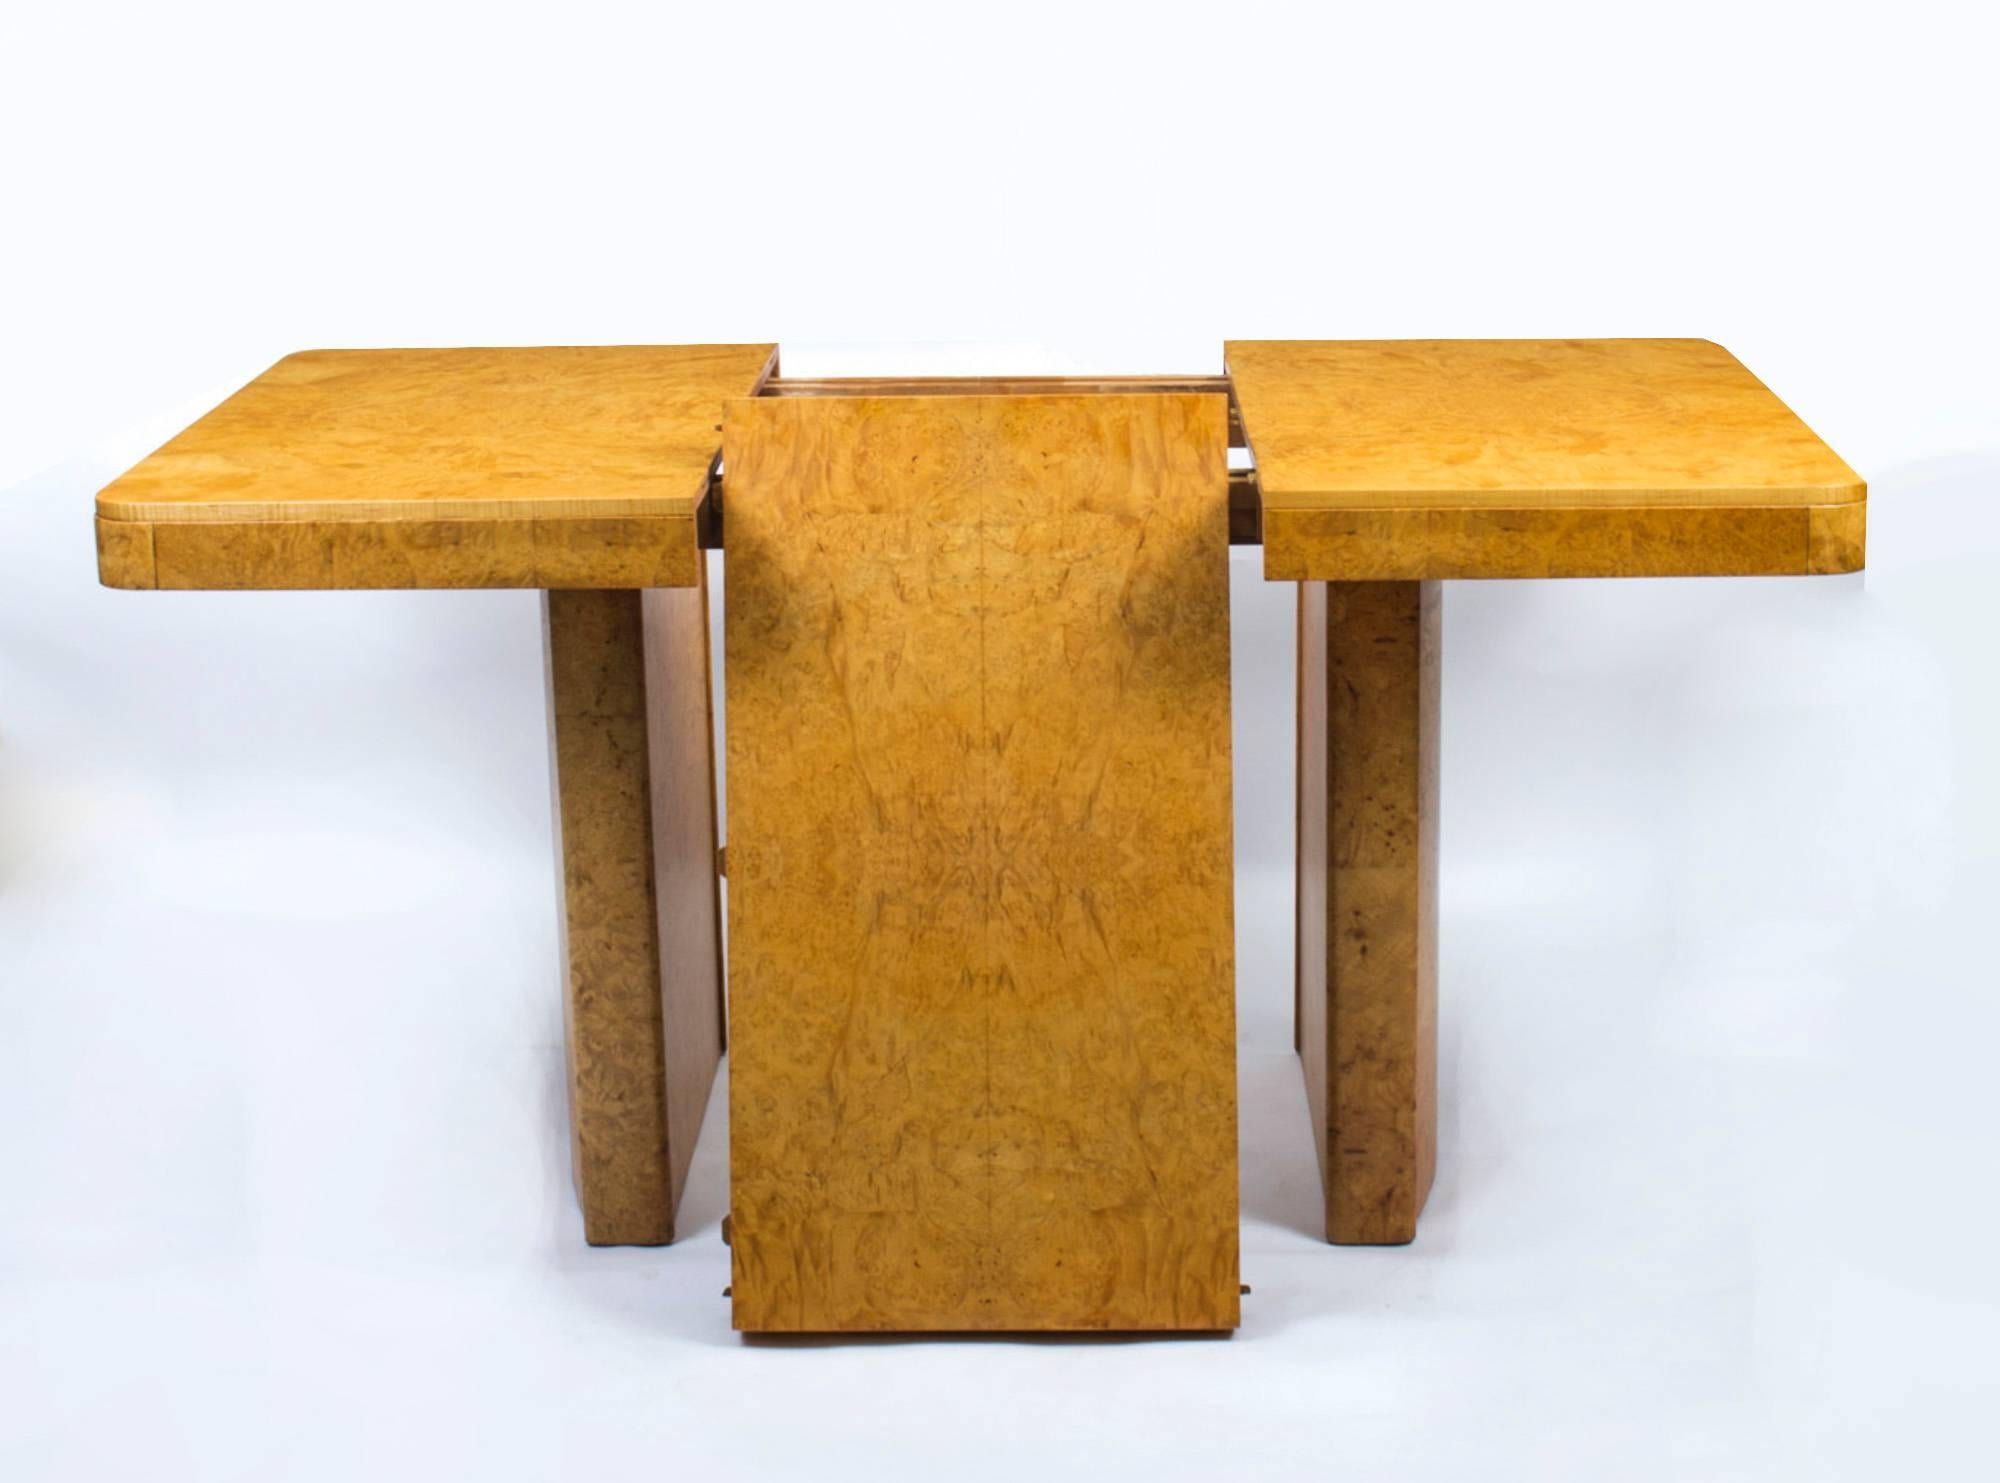 This is a wonderful example of an art deco antique dining table dating from 1930. Crafted in birdseye maple the table has rounded corners and is set on twin pedestal legs.

This art deco antique dining table can be extended by the insertion of a